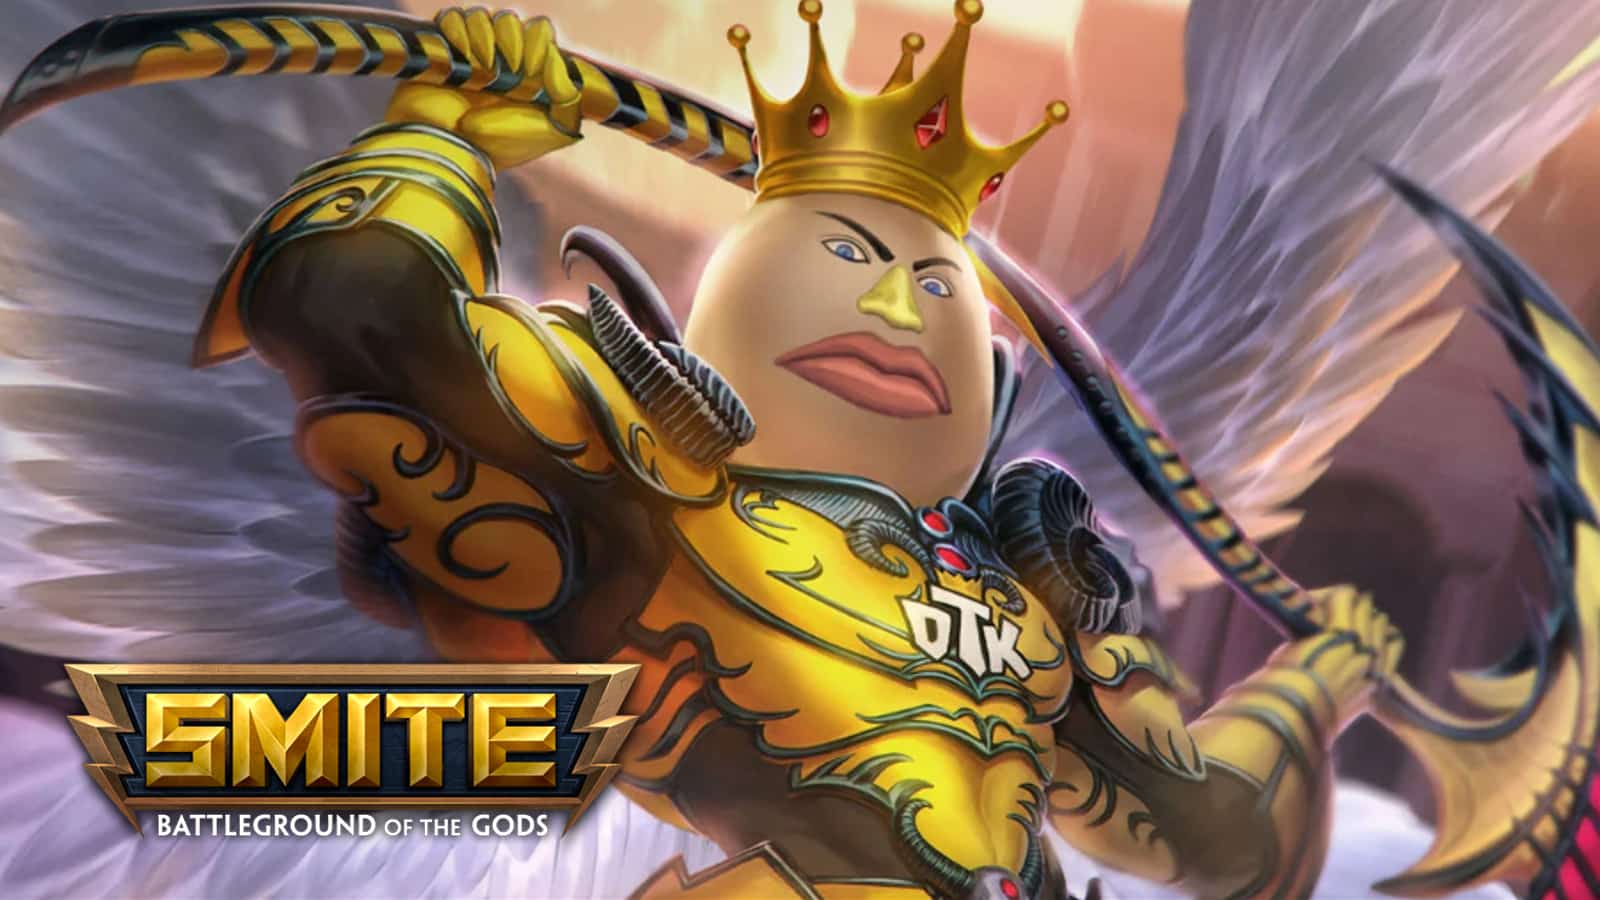 How to claim SMITE Prime Gaming reward drops (August 2021) - Dexerto